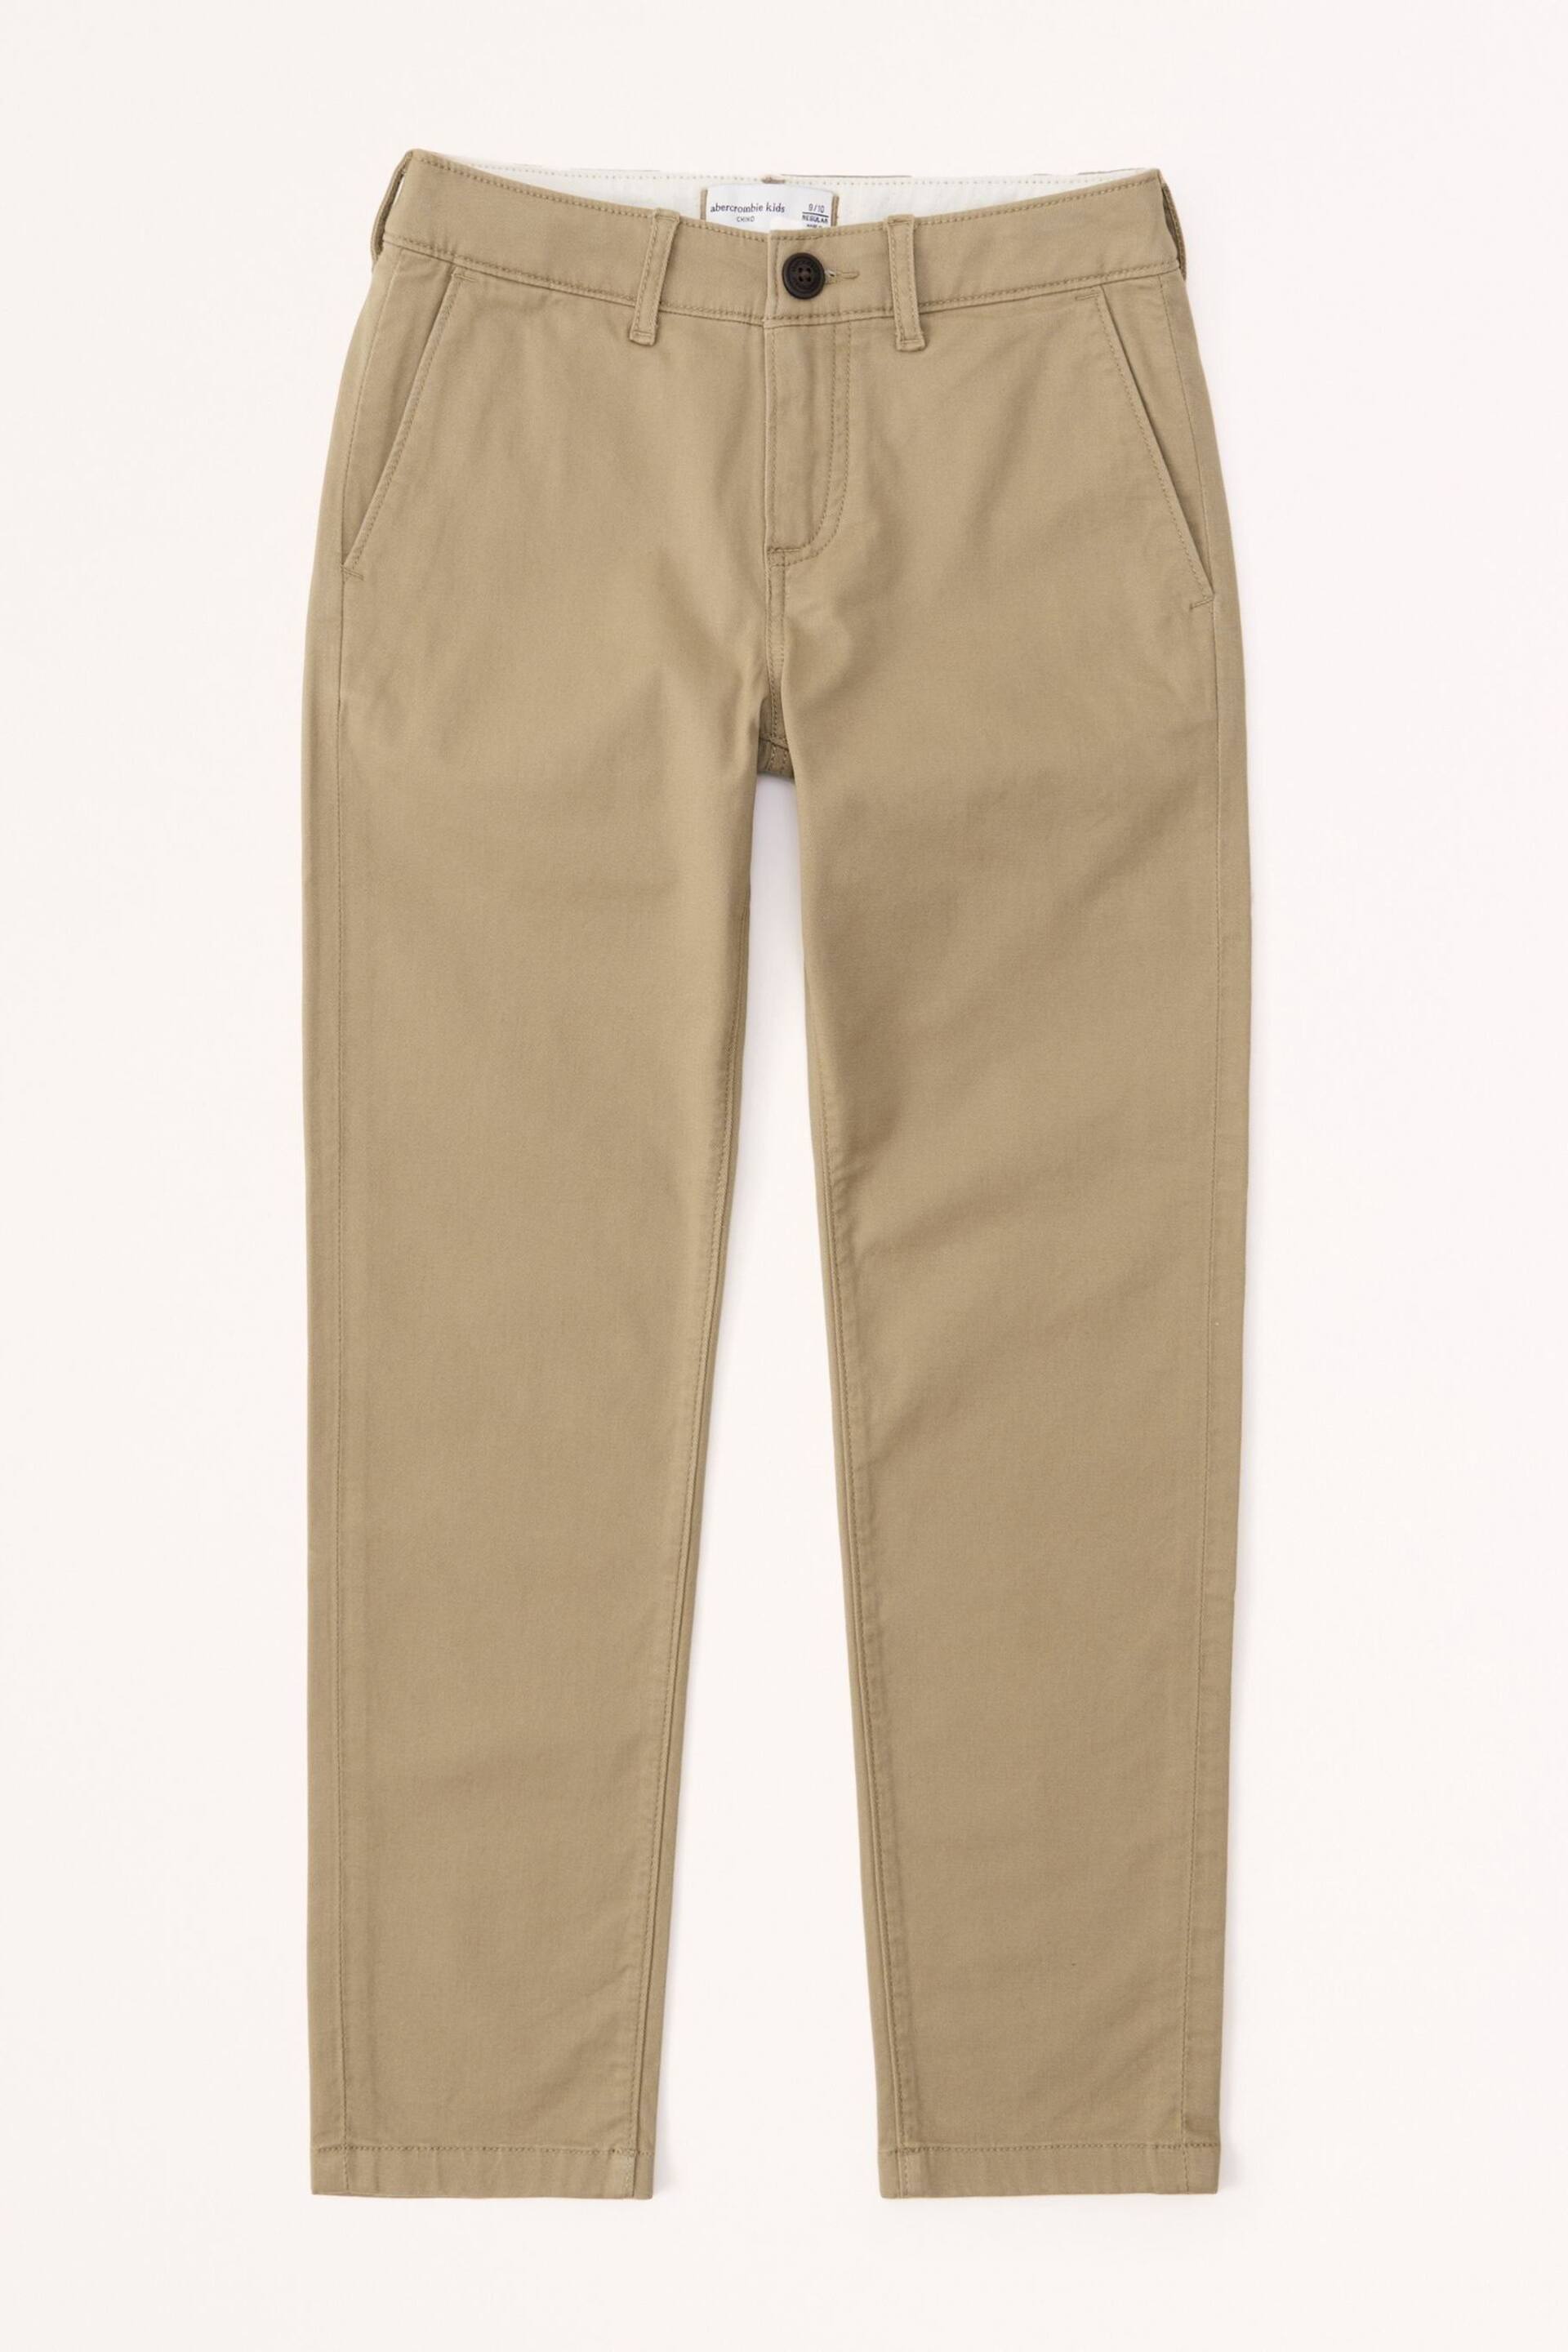 Abercrombie & Fitch Twill Smart Chino Brown Trousers - Image 4 of 5